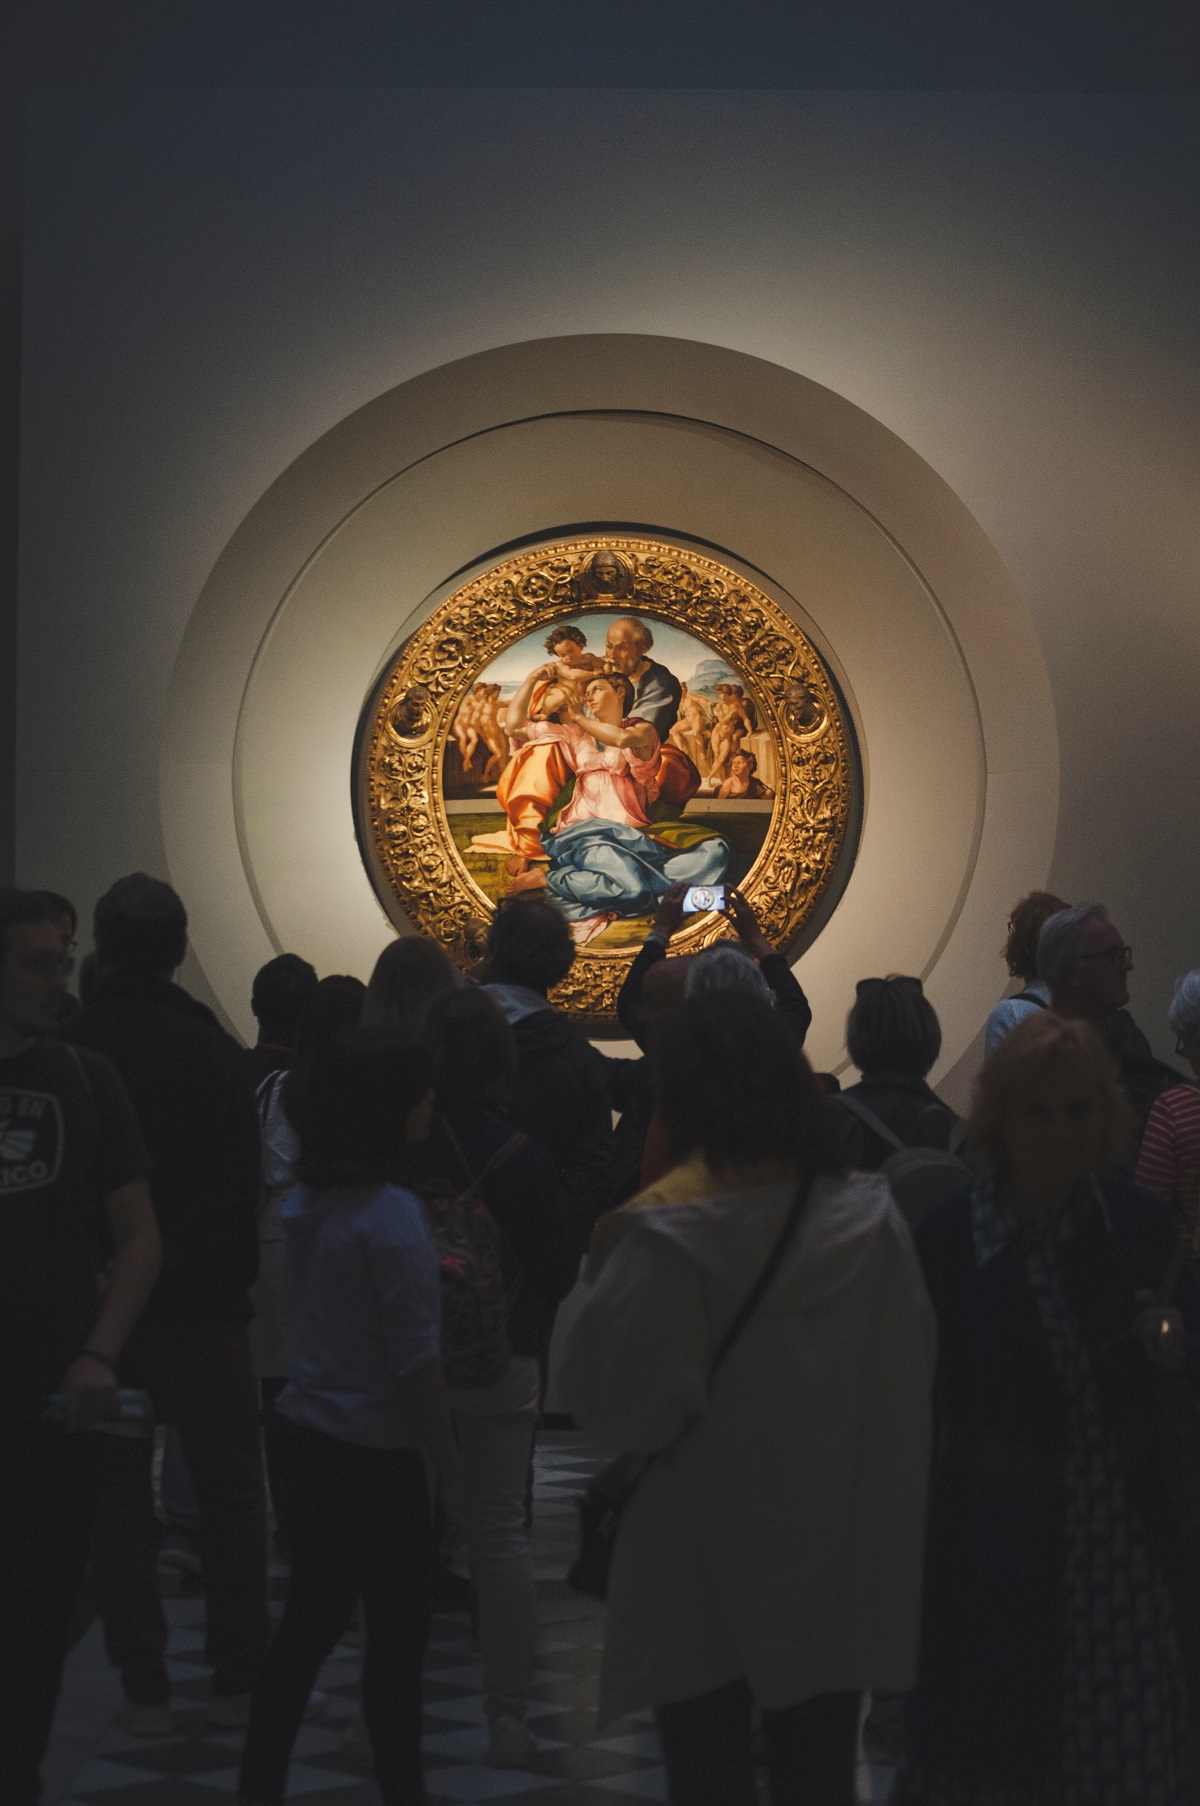 Visitors in a dark art museum gather around a painting illuminated by lights